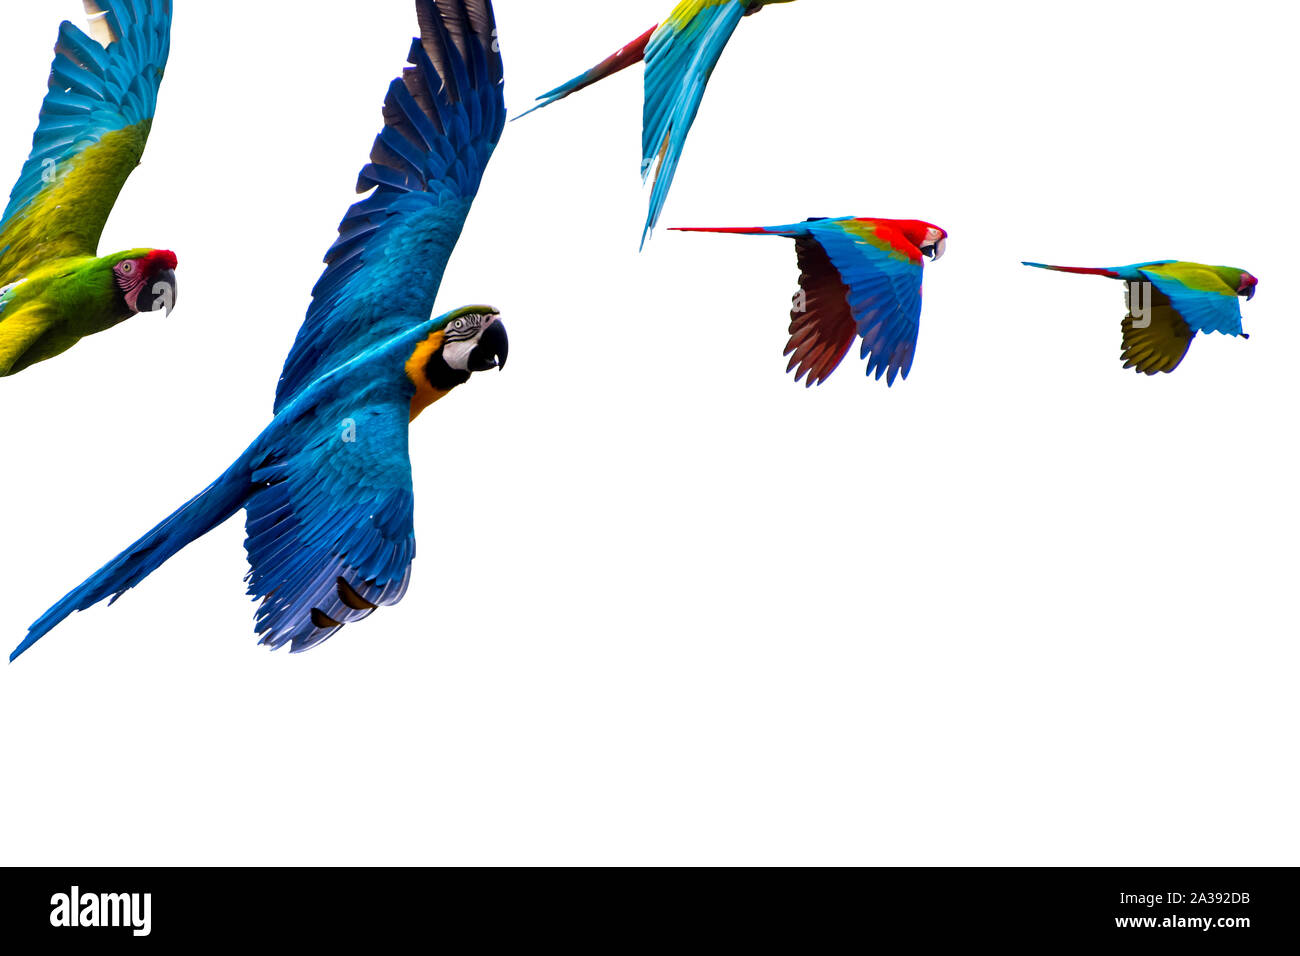 Parrots flying on a pure white background looking strait into the camera with empty space and negative space Stock Photo